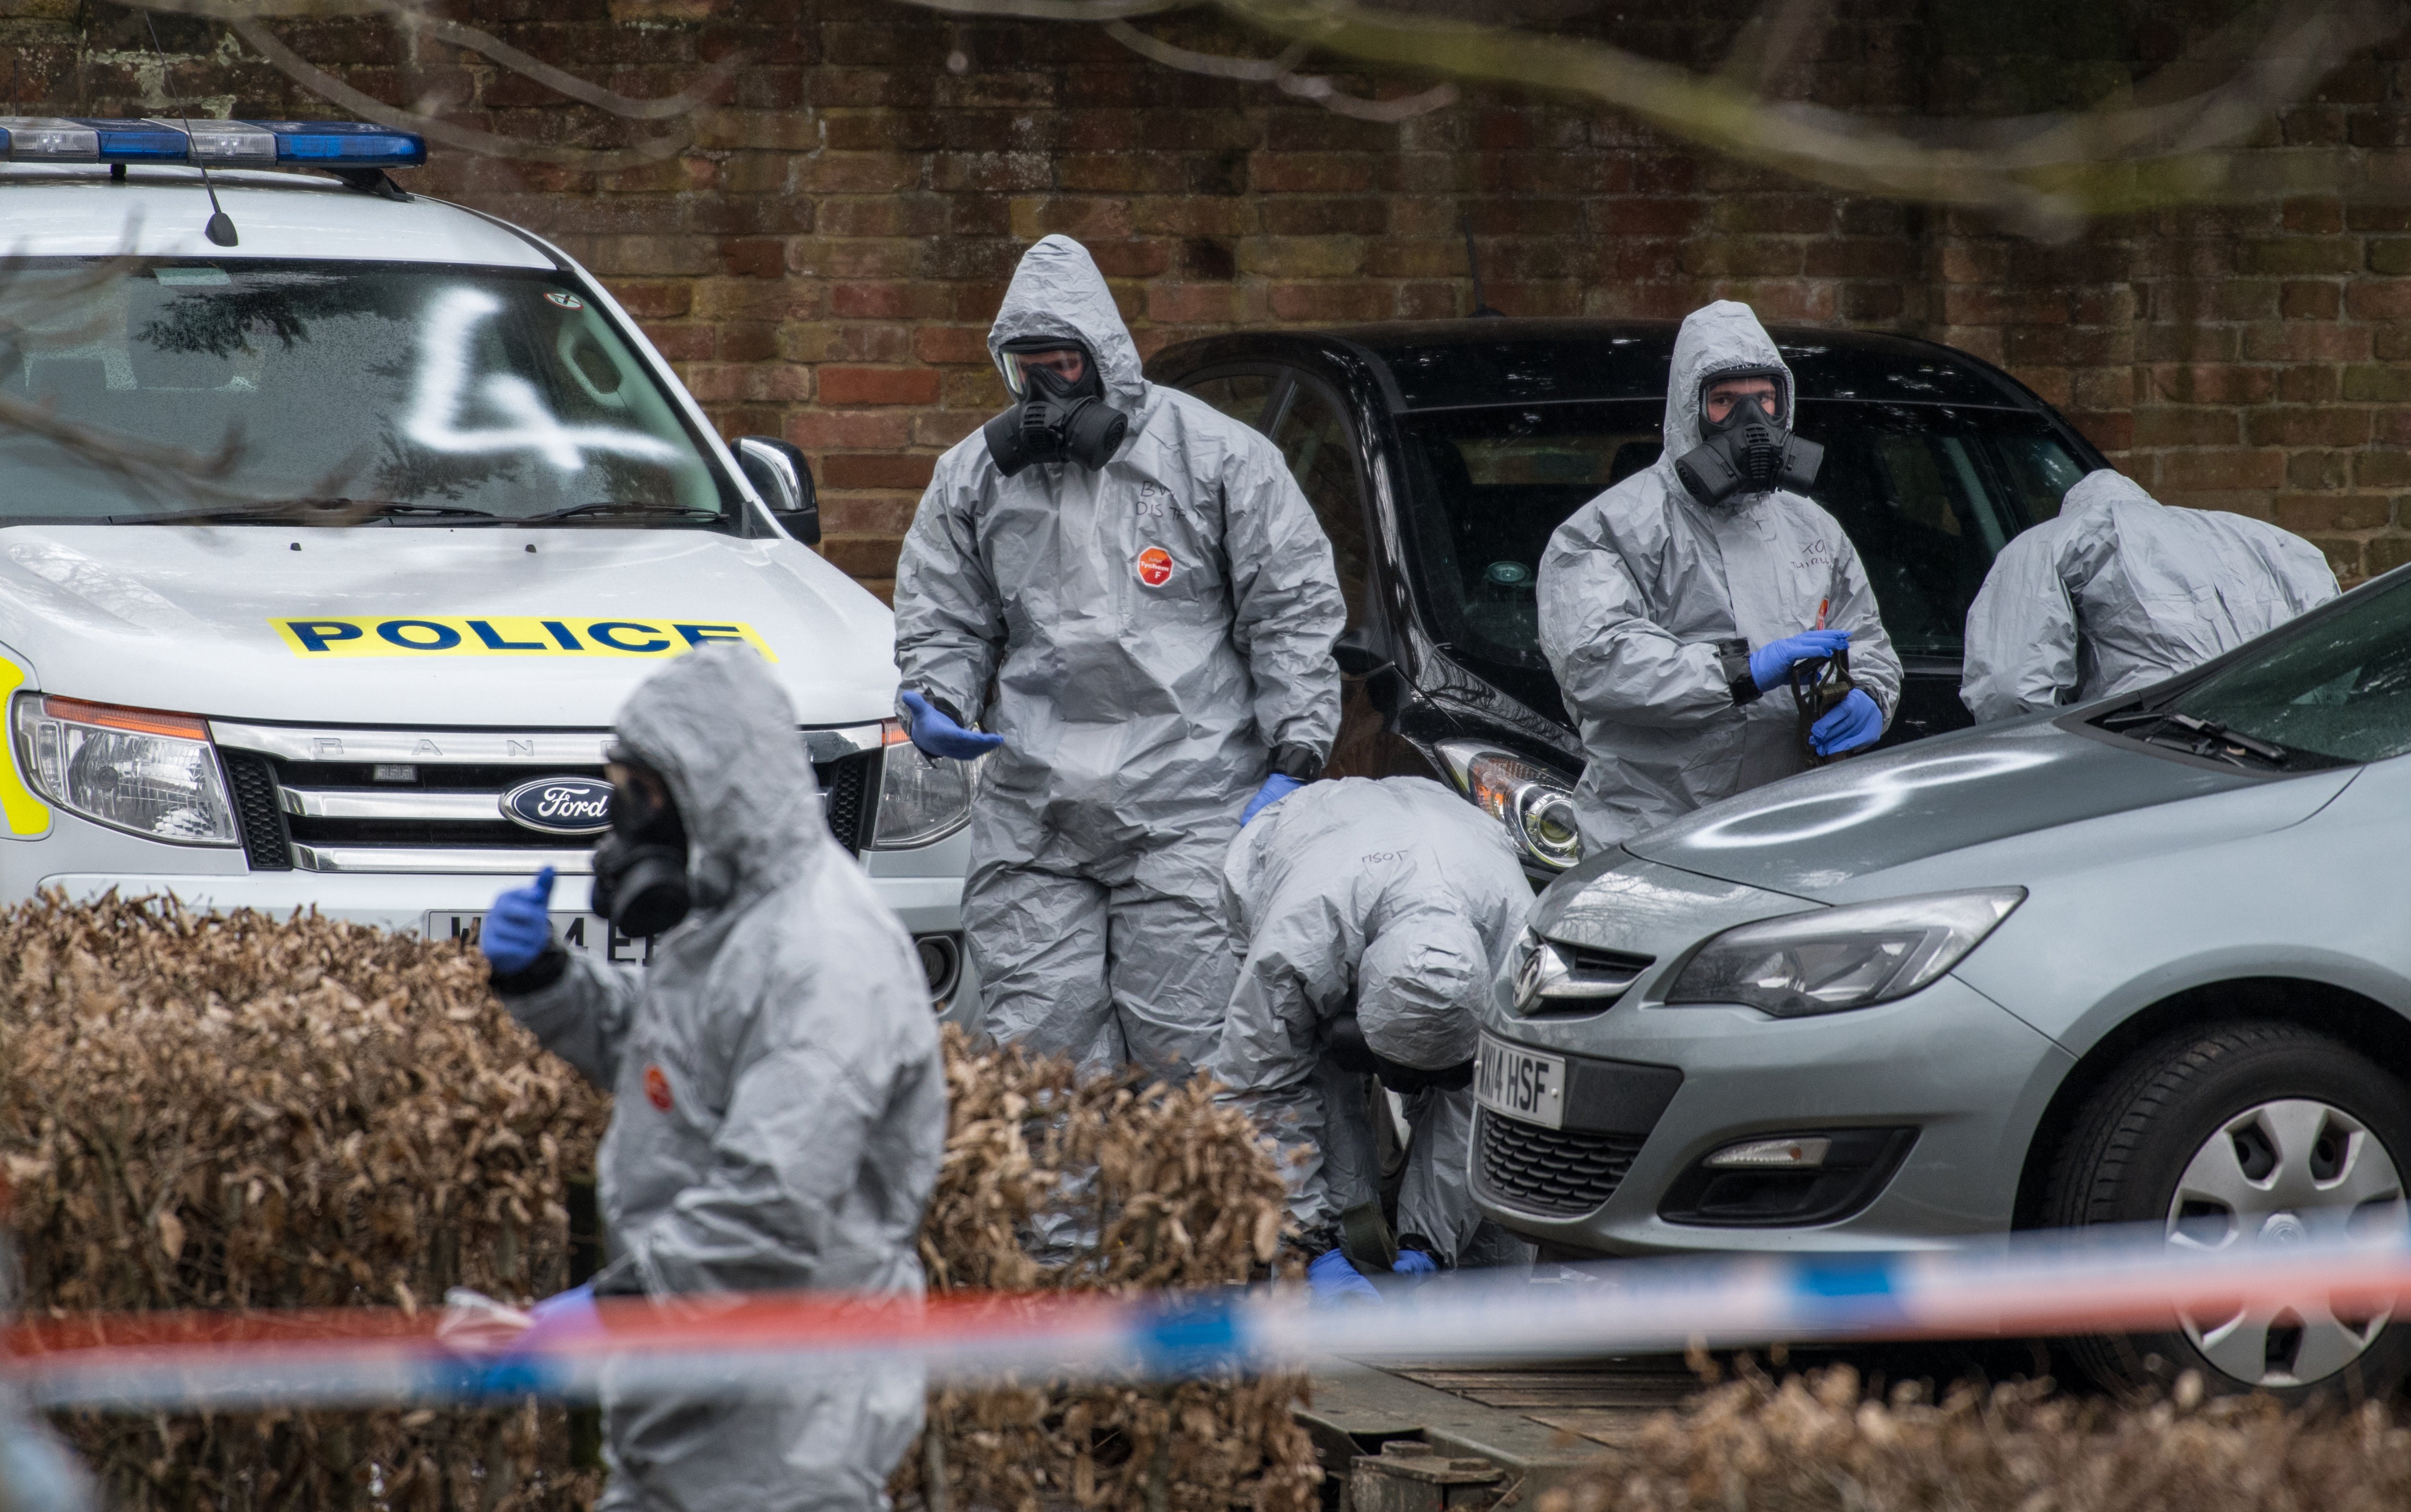 former Russian spy Sergei Skripal, his daughter Yulia and ex-police officer Nick Bailey were poisoned nearby Salisbury